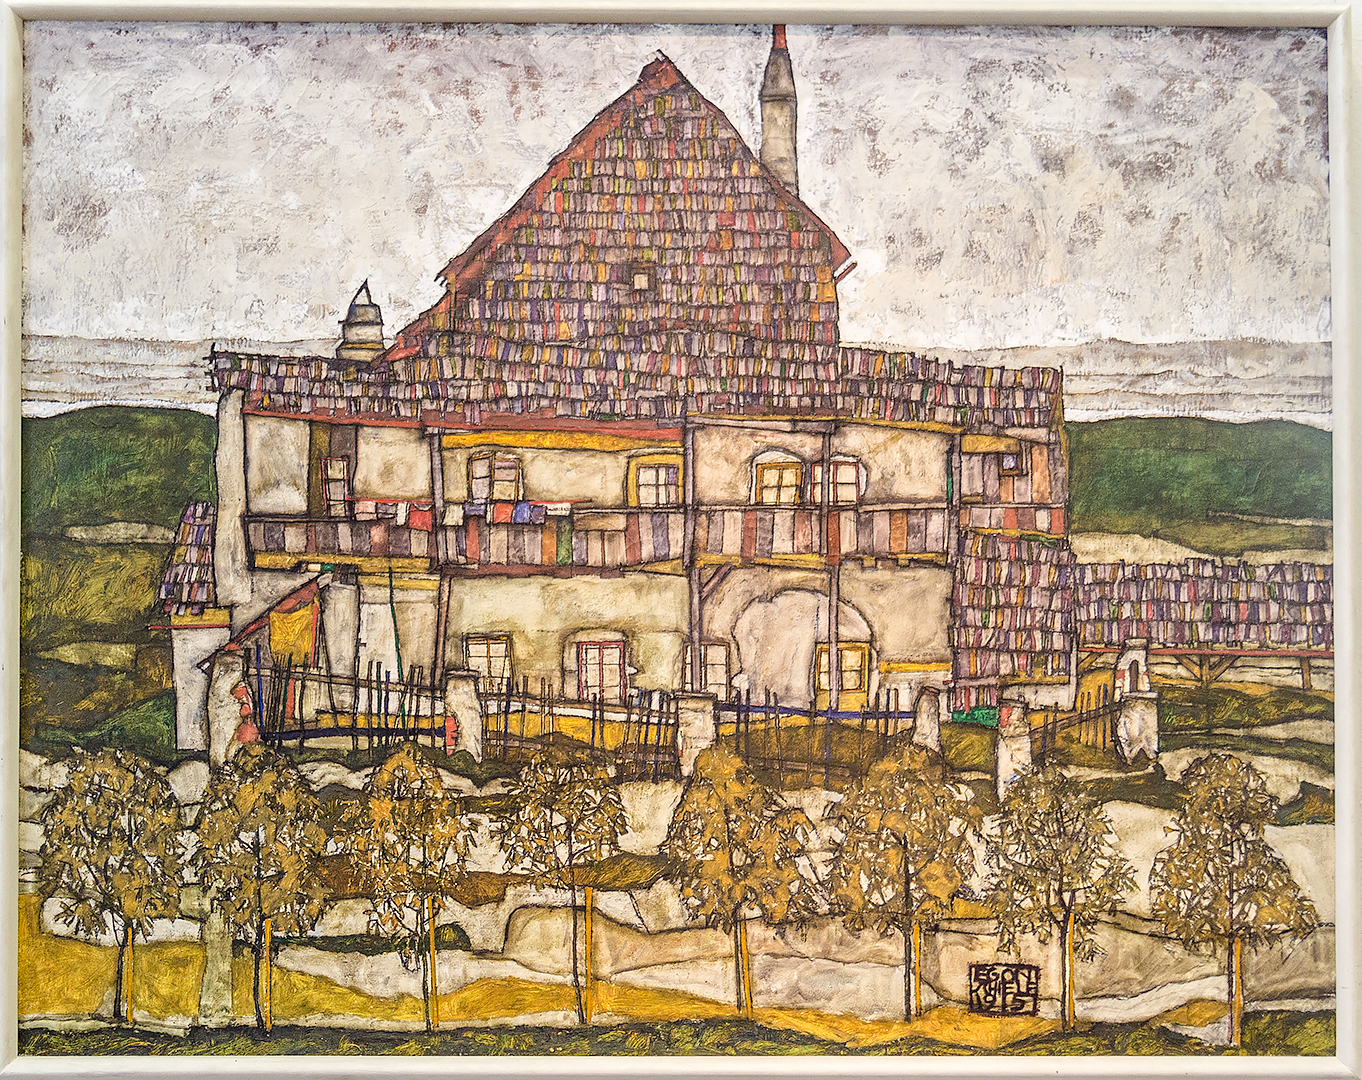 House with Shingles by Egon Scheile